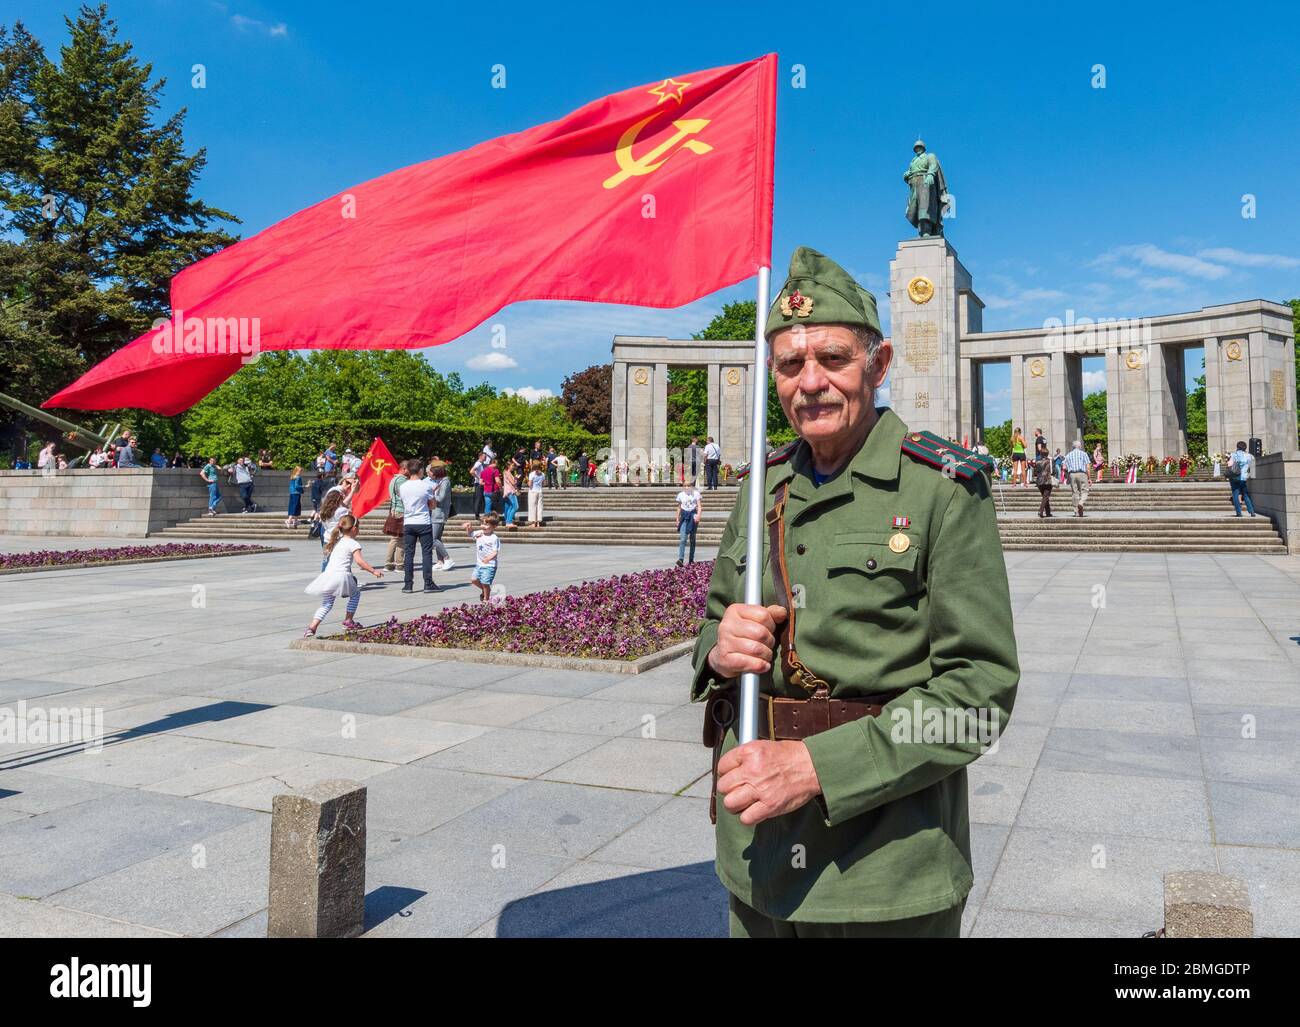 Man wearing WWII uniform and carrying Soviet flag stands in front of  Soviet war memorial in Tiergarten, Berlin to mark the 75th anniversary of the victory over Nazi Germany Stock Photo